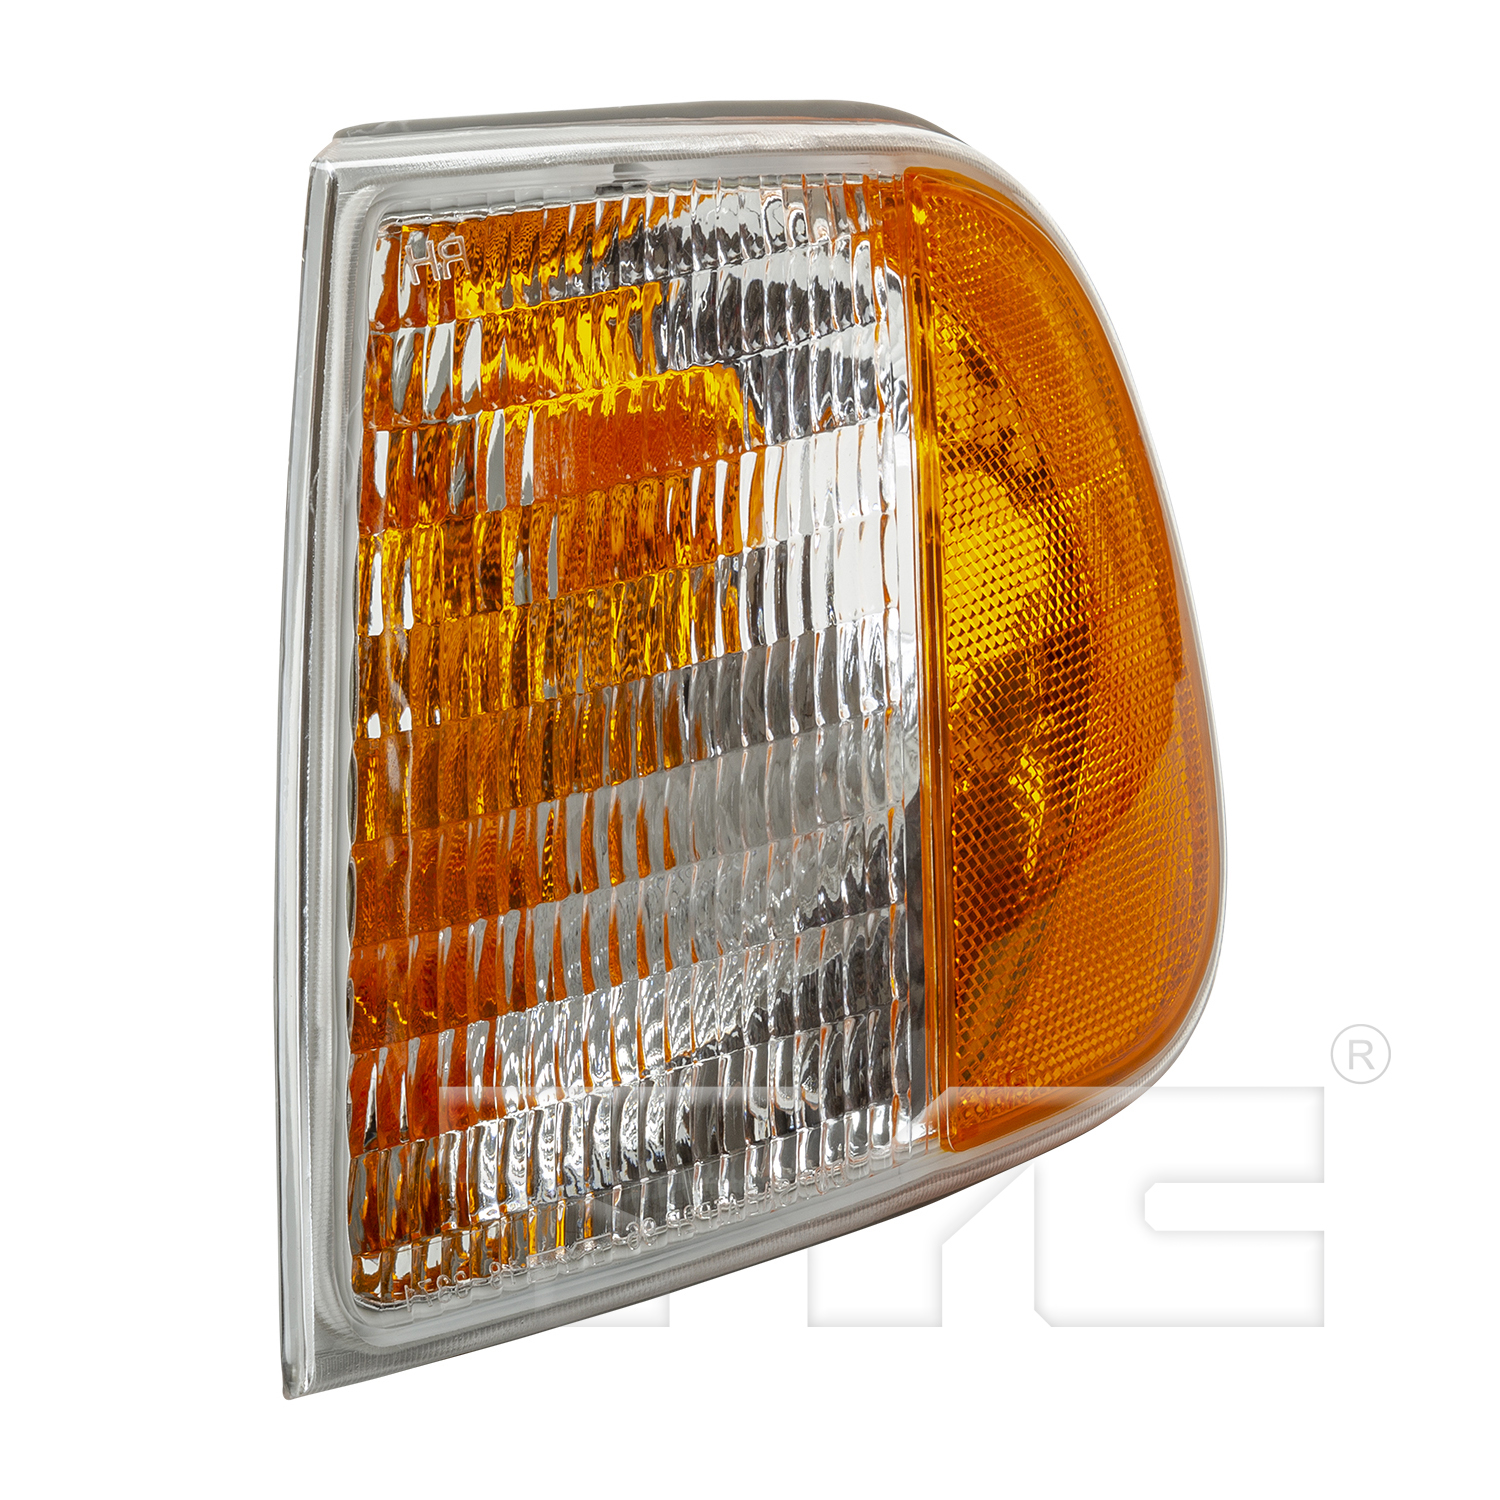 Aftermarket LAMPS for FORD - F-150, F-150,97-03,LT Front marker lamp assy